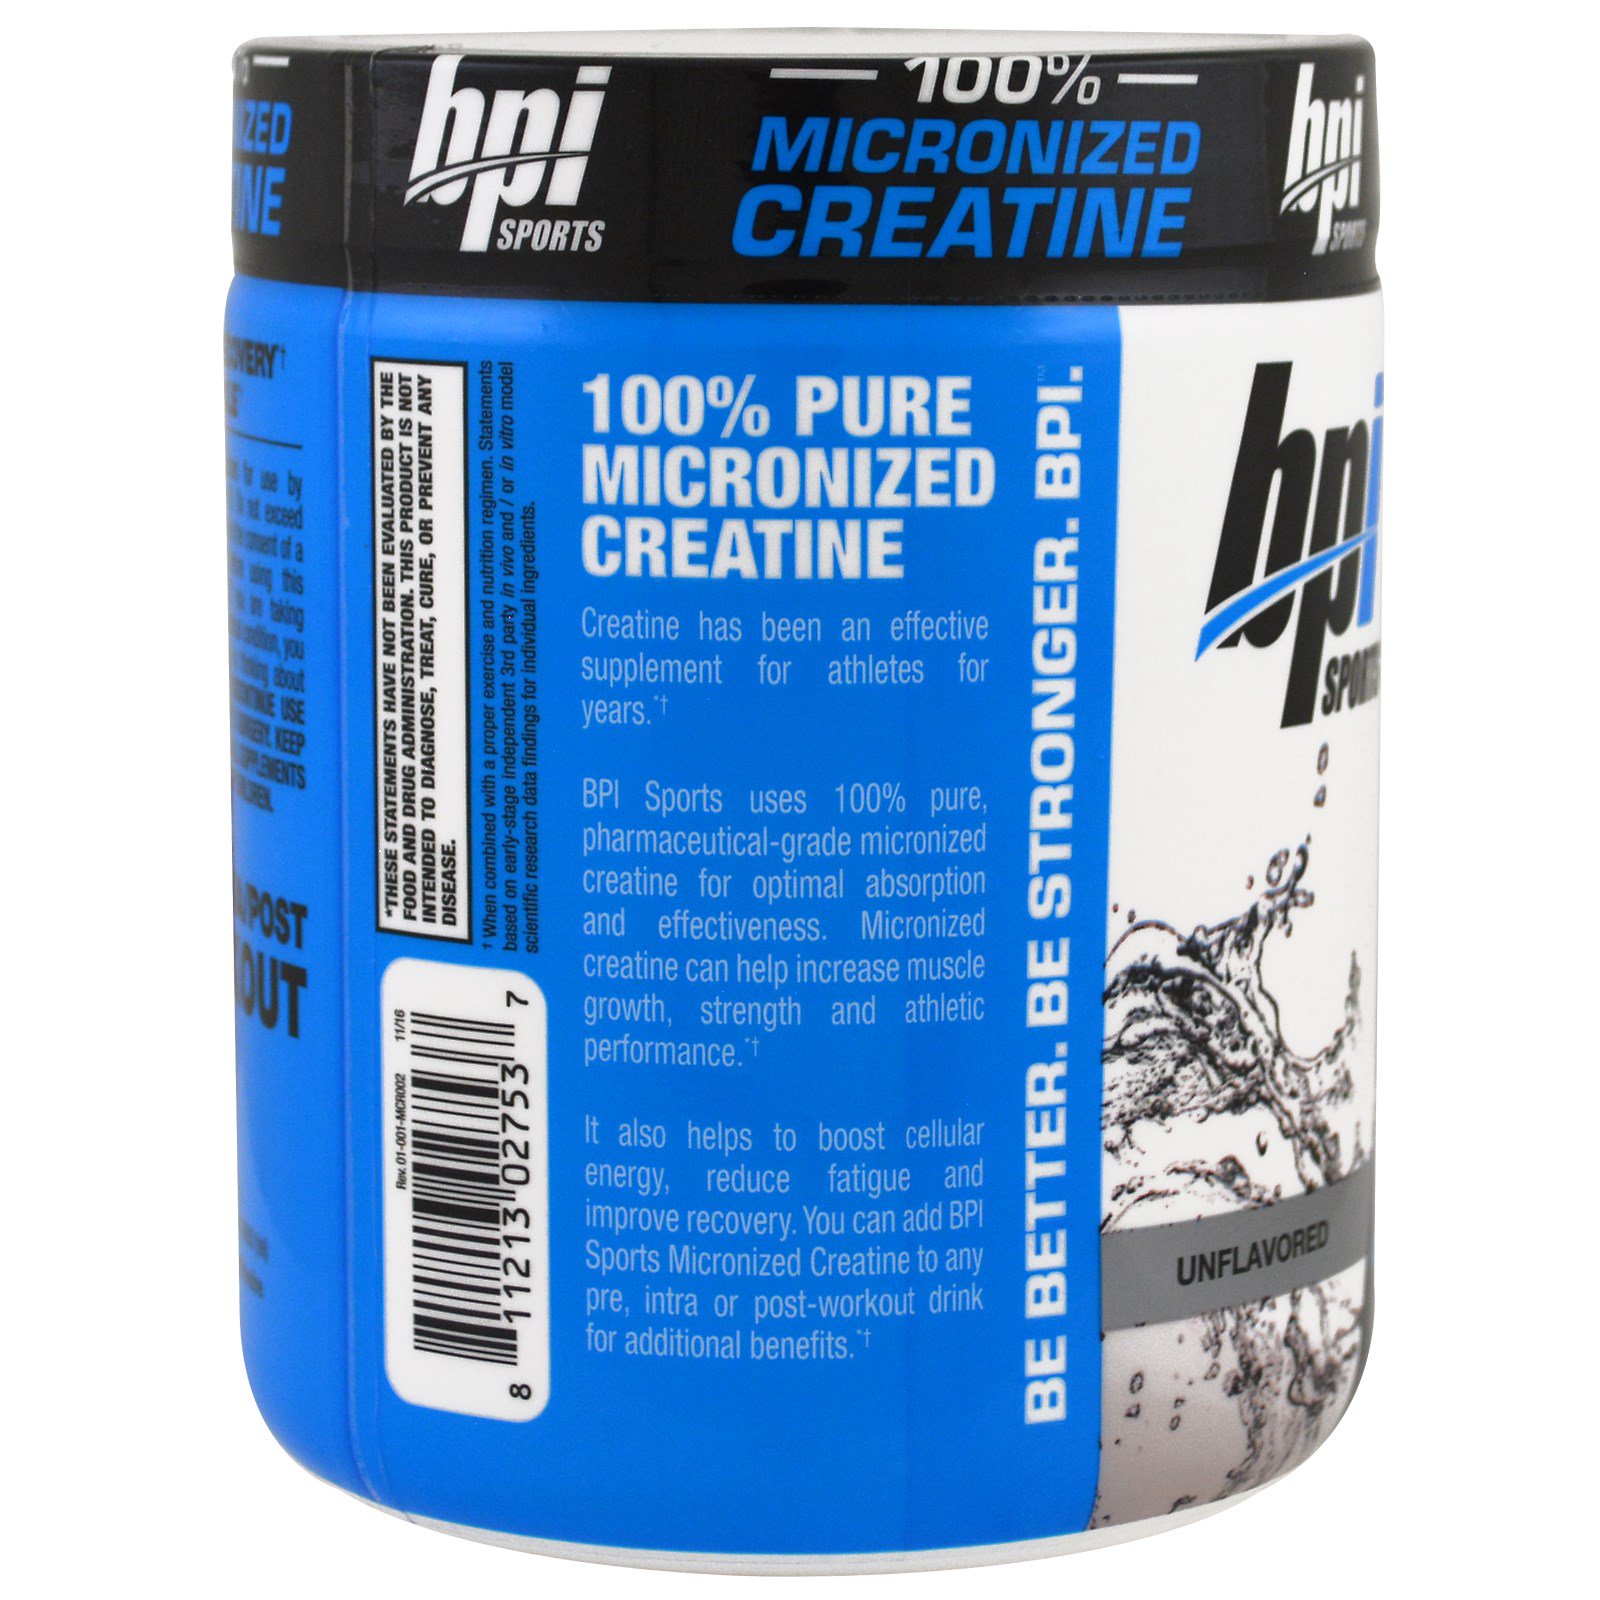 Bpi Sports Micronized Creatine Limited Edition Unflavored 10 58 Oz 300 G Iherb